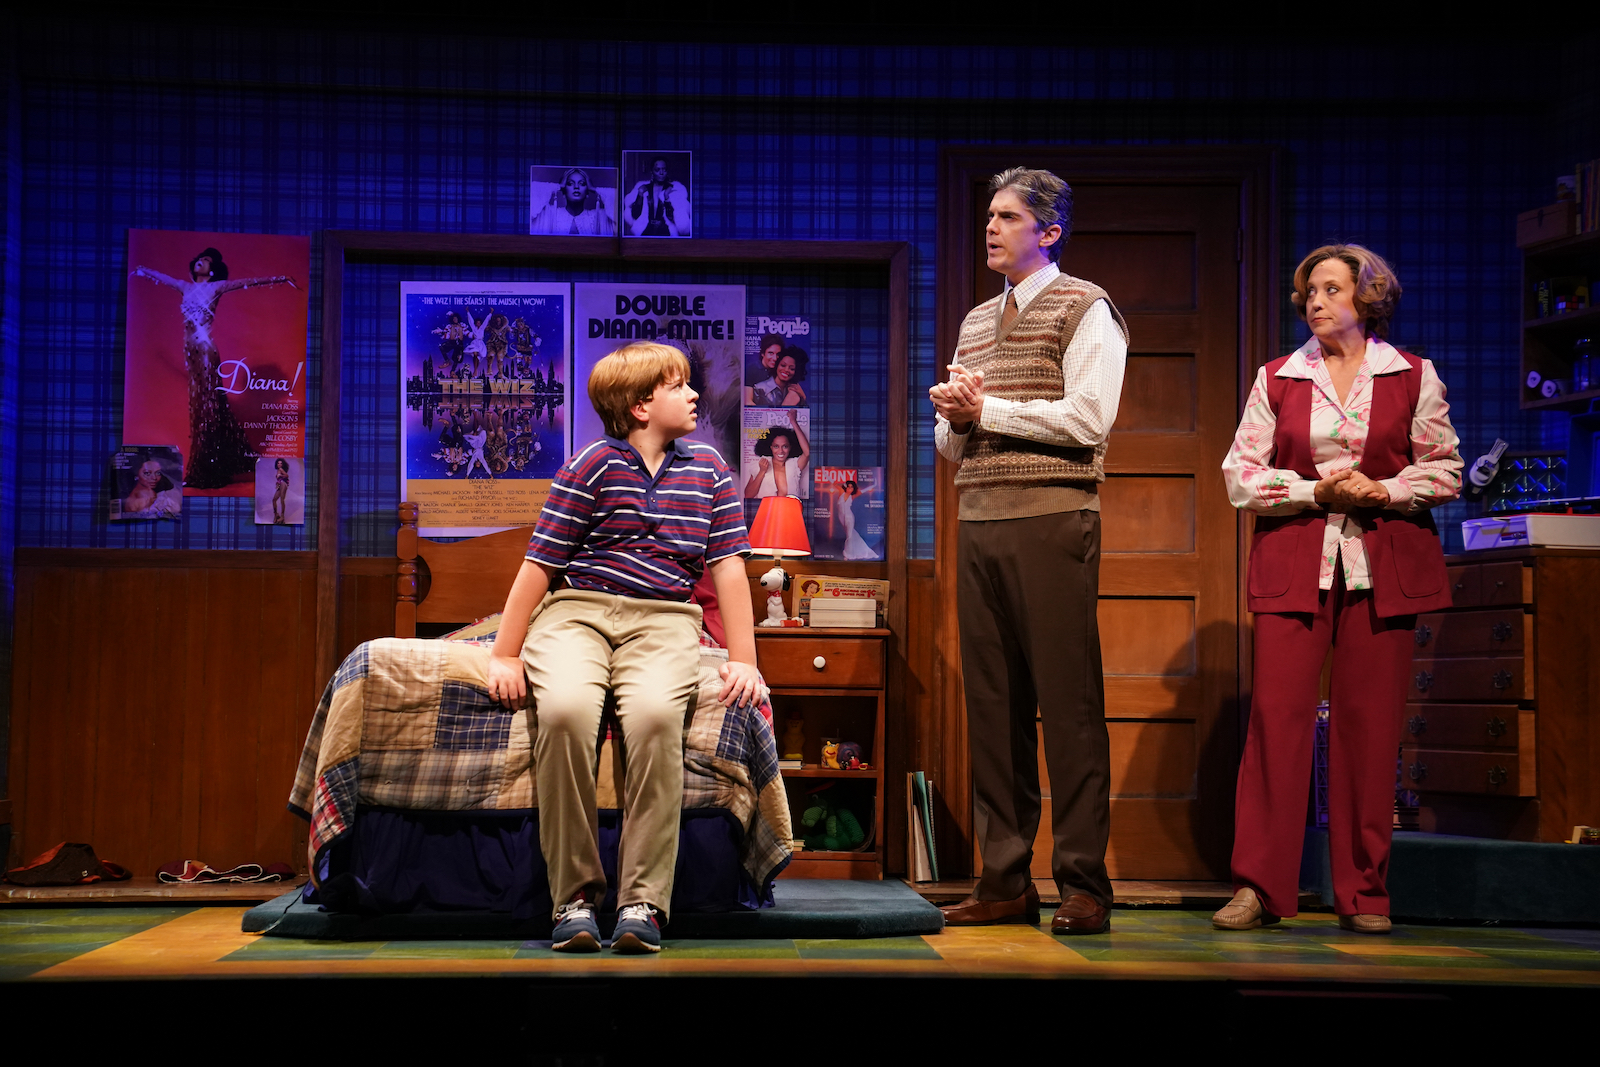 Jarrod Zimmerman with Holden Hagelberger and Sally Wilfert in Trevor the musical at Stage 42